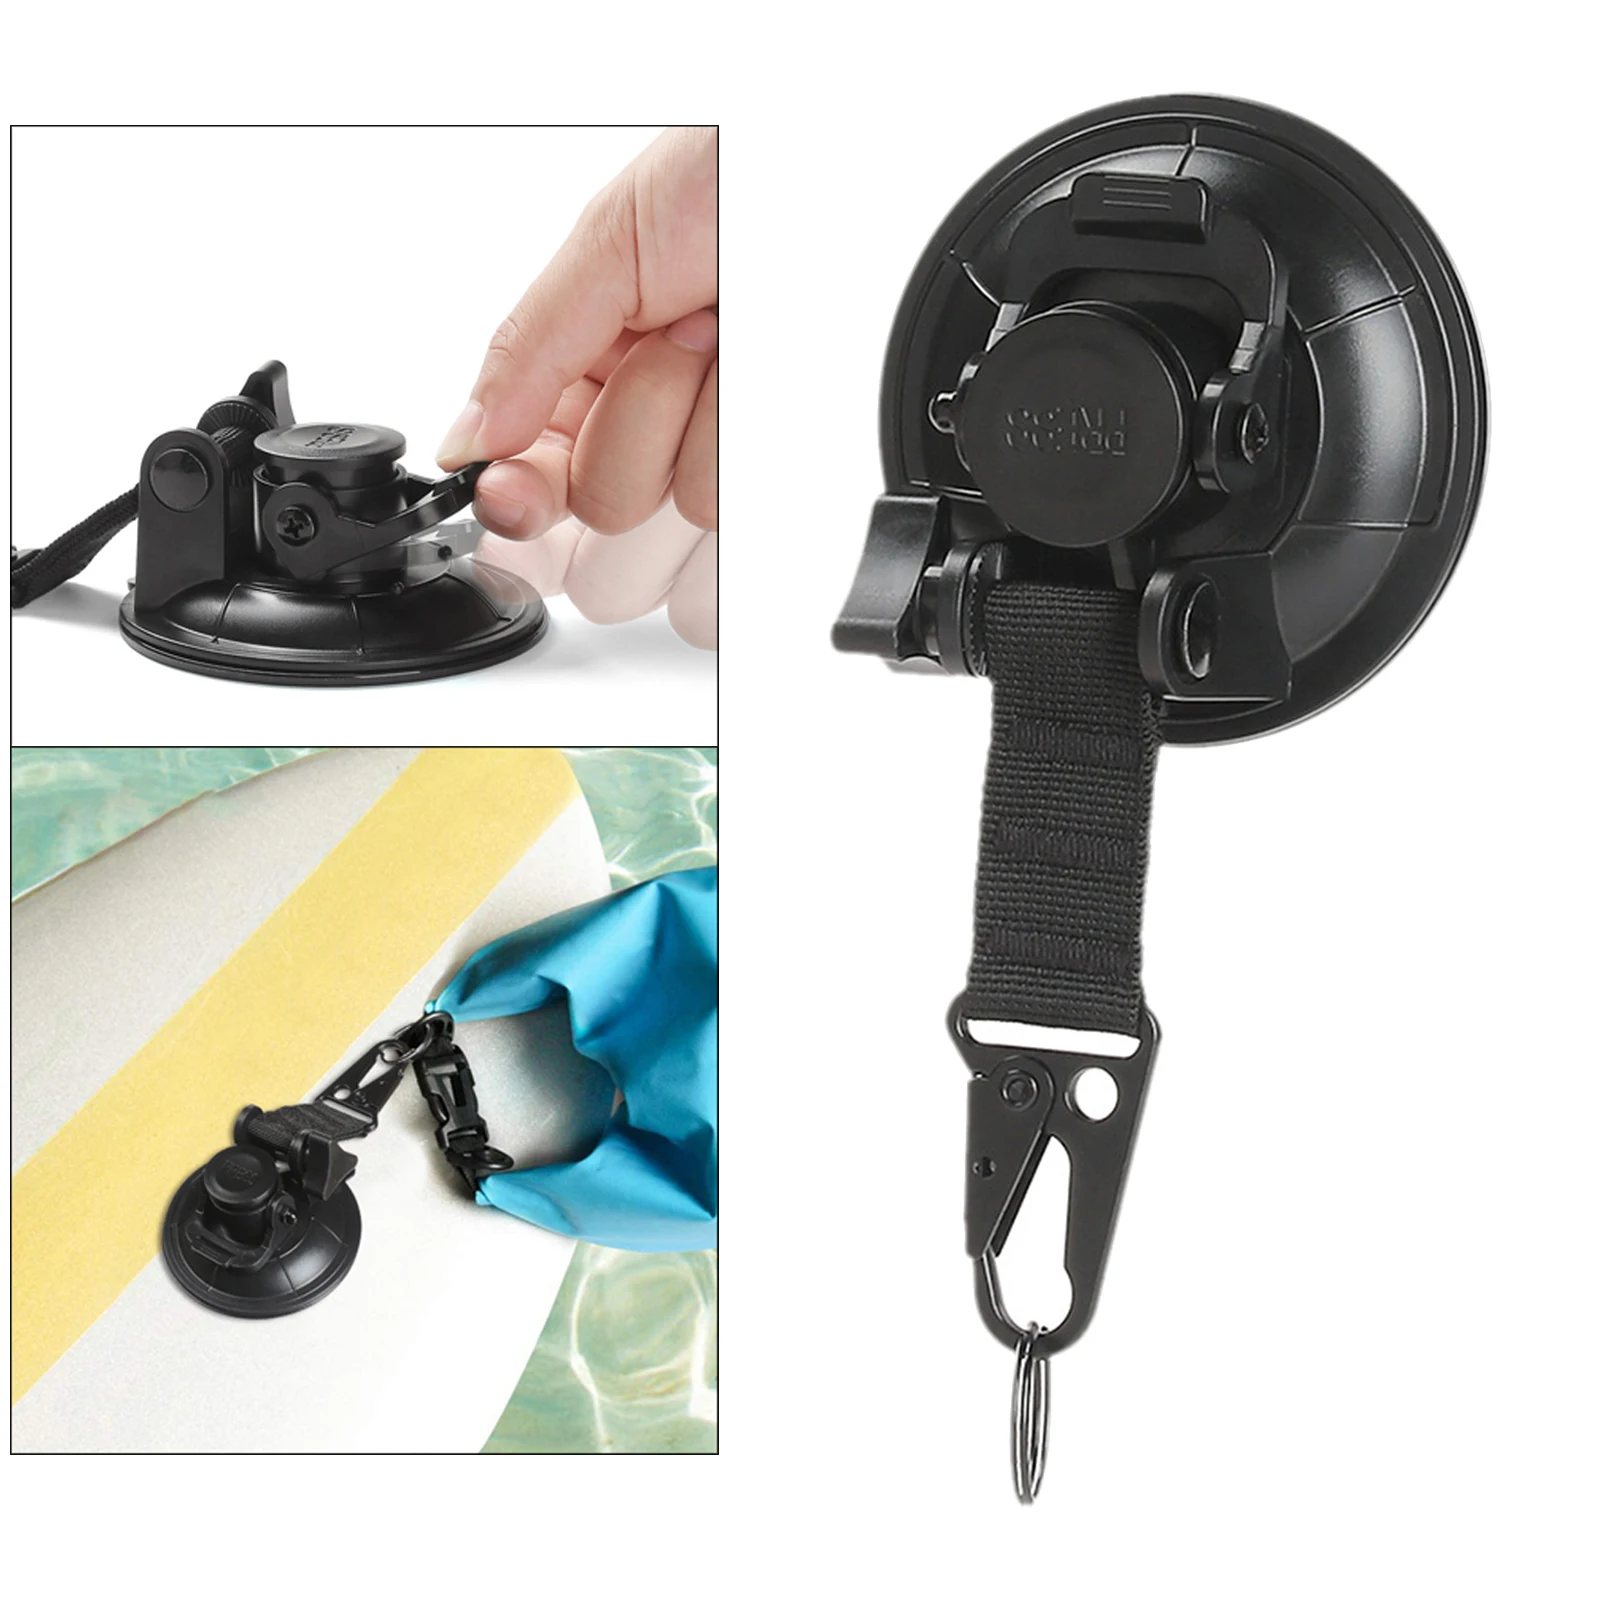 Universal Sturdy Suction Cup Anchor Multifunction Car Side Awning Pool Tarps Camp Canopy Tent Fixed